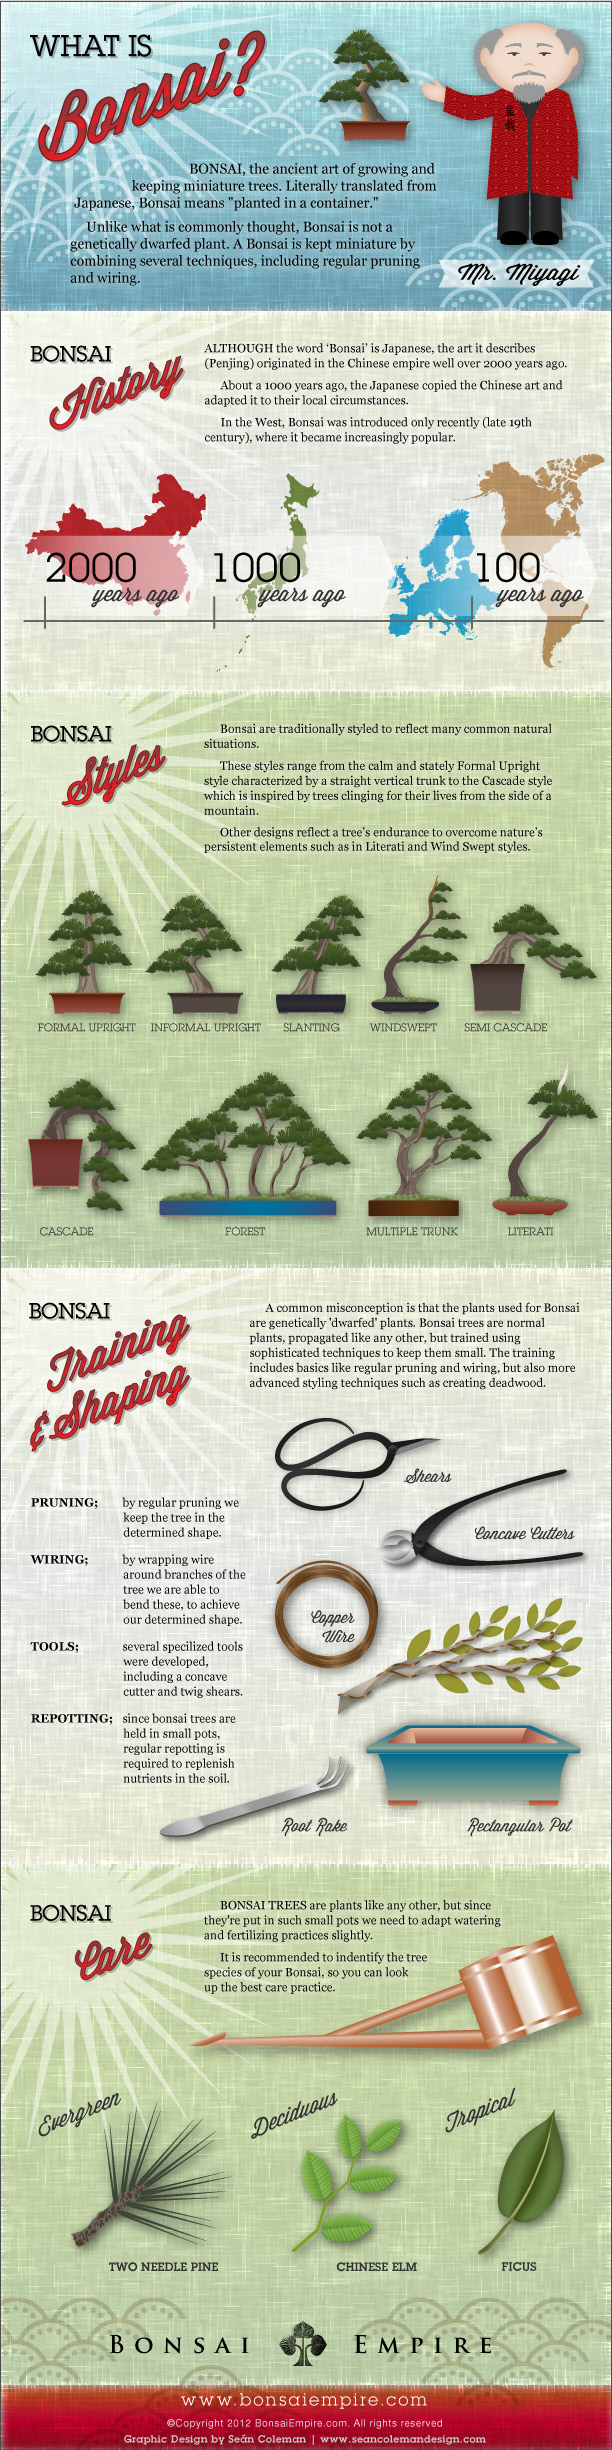 Bonsai Trees for Dummies infographic